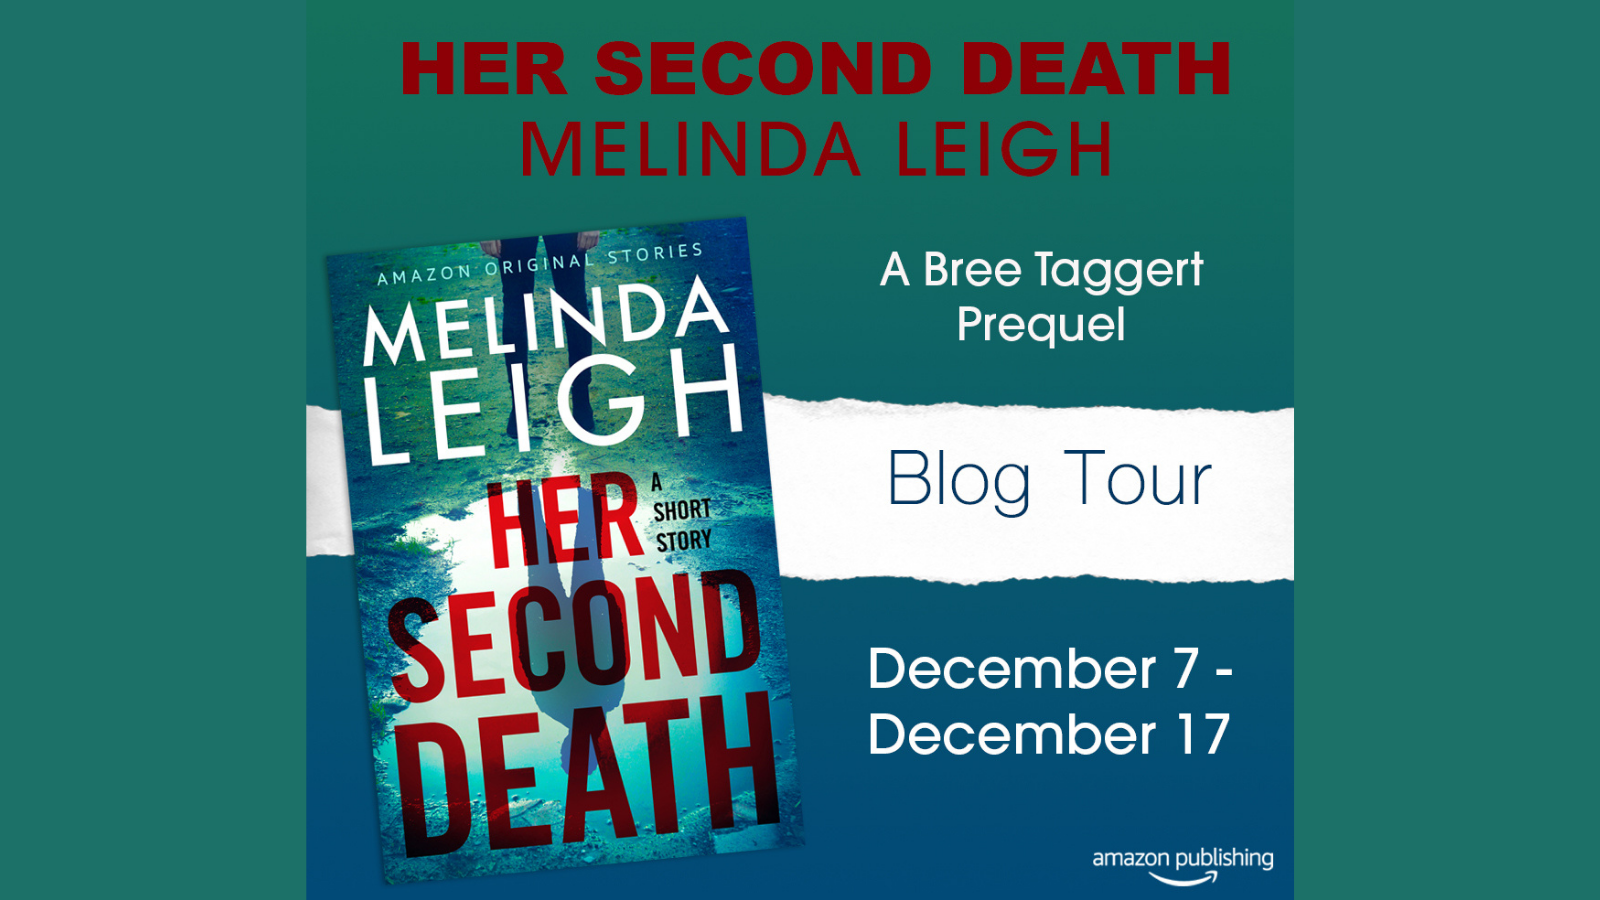 Her Second Death by Melinda Leigh